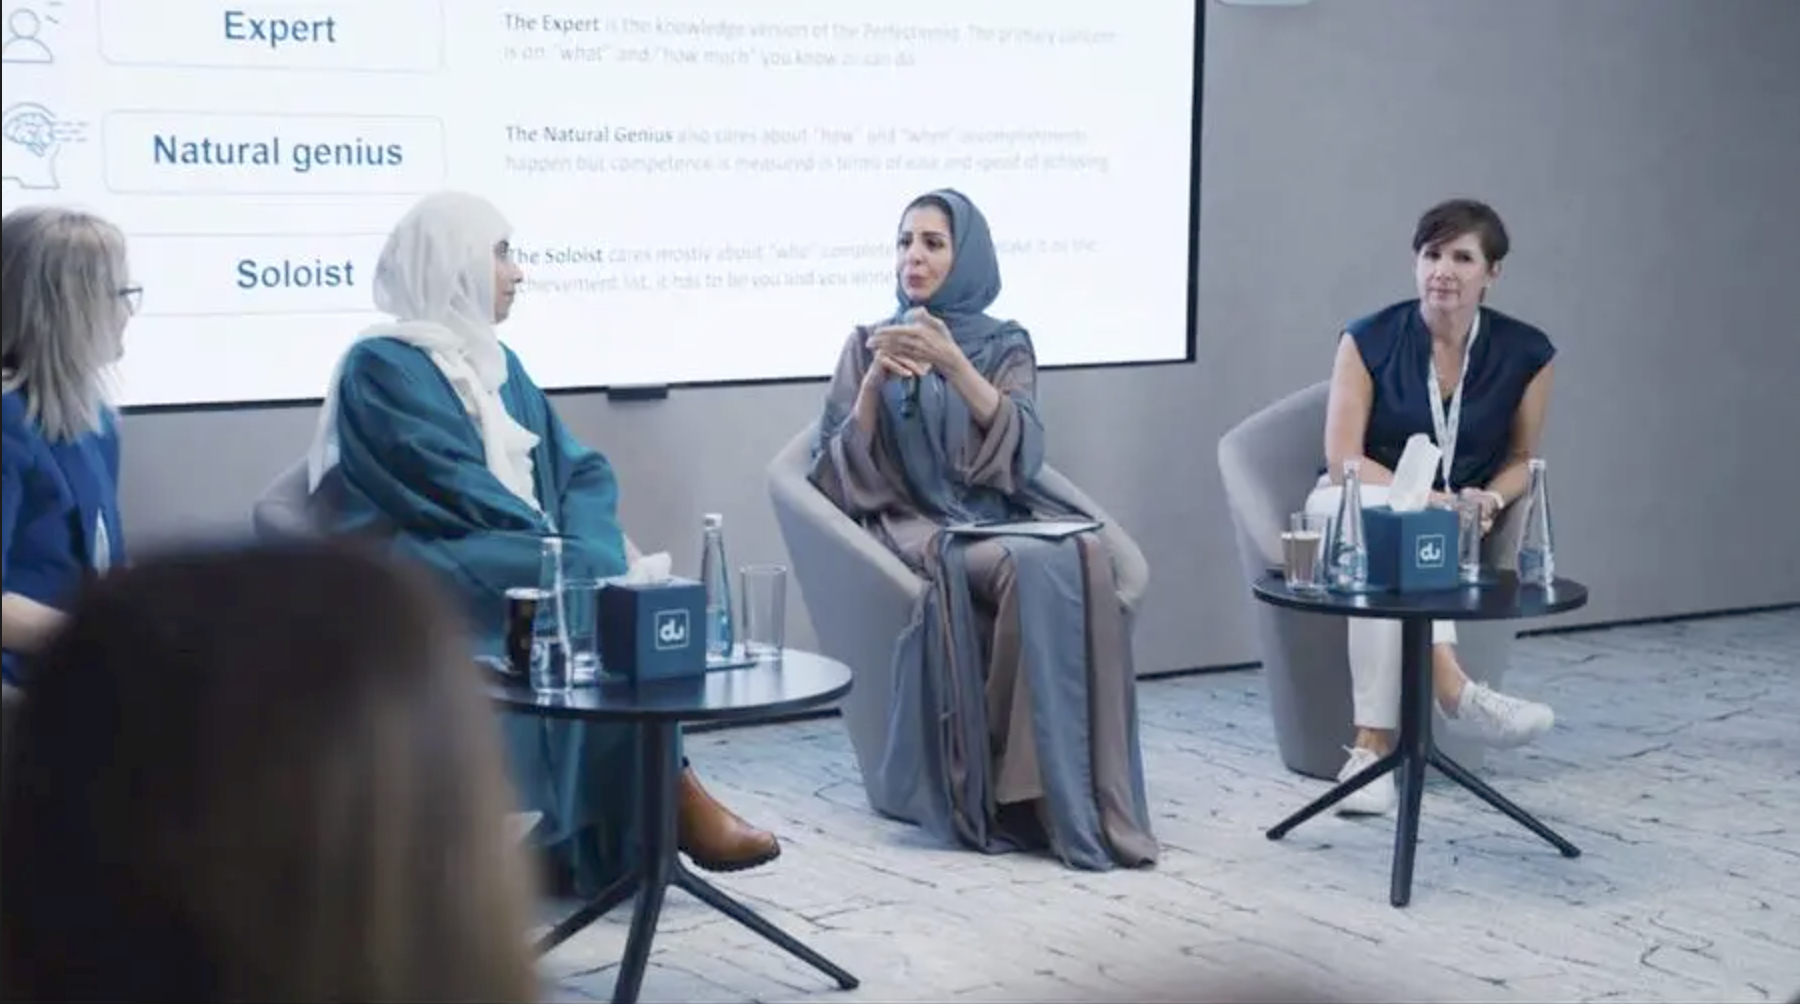 Du's ICT workshop with Aurora50, 22 March 2023: Diana Wilde, Co-Founder Aurora50; Dr. Hoda Alkhzaimi, Co-Chair, Global Future Council for Cybersecurity, World Economic Forum; Hanan Ahmed, Chief Regulatory Affairs and Risk Officer, du; and Fiona Fox, Finance Director MEA, Microsoft